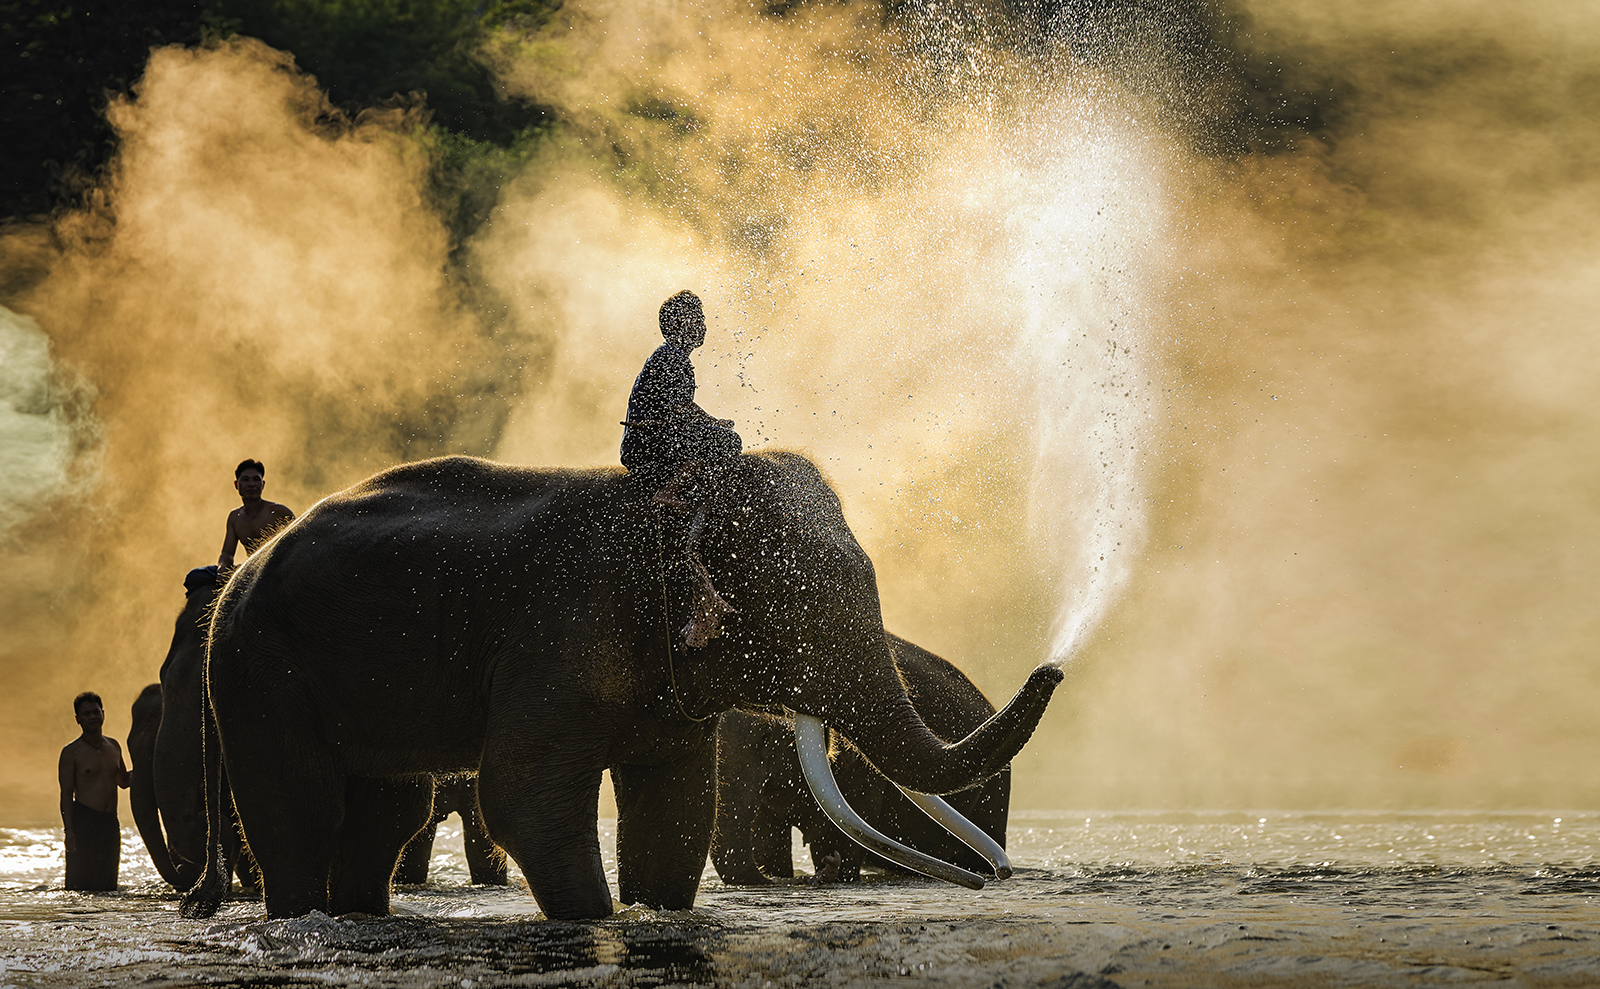 silhouette of children riding elephants in the water at sunset